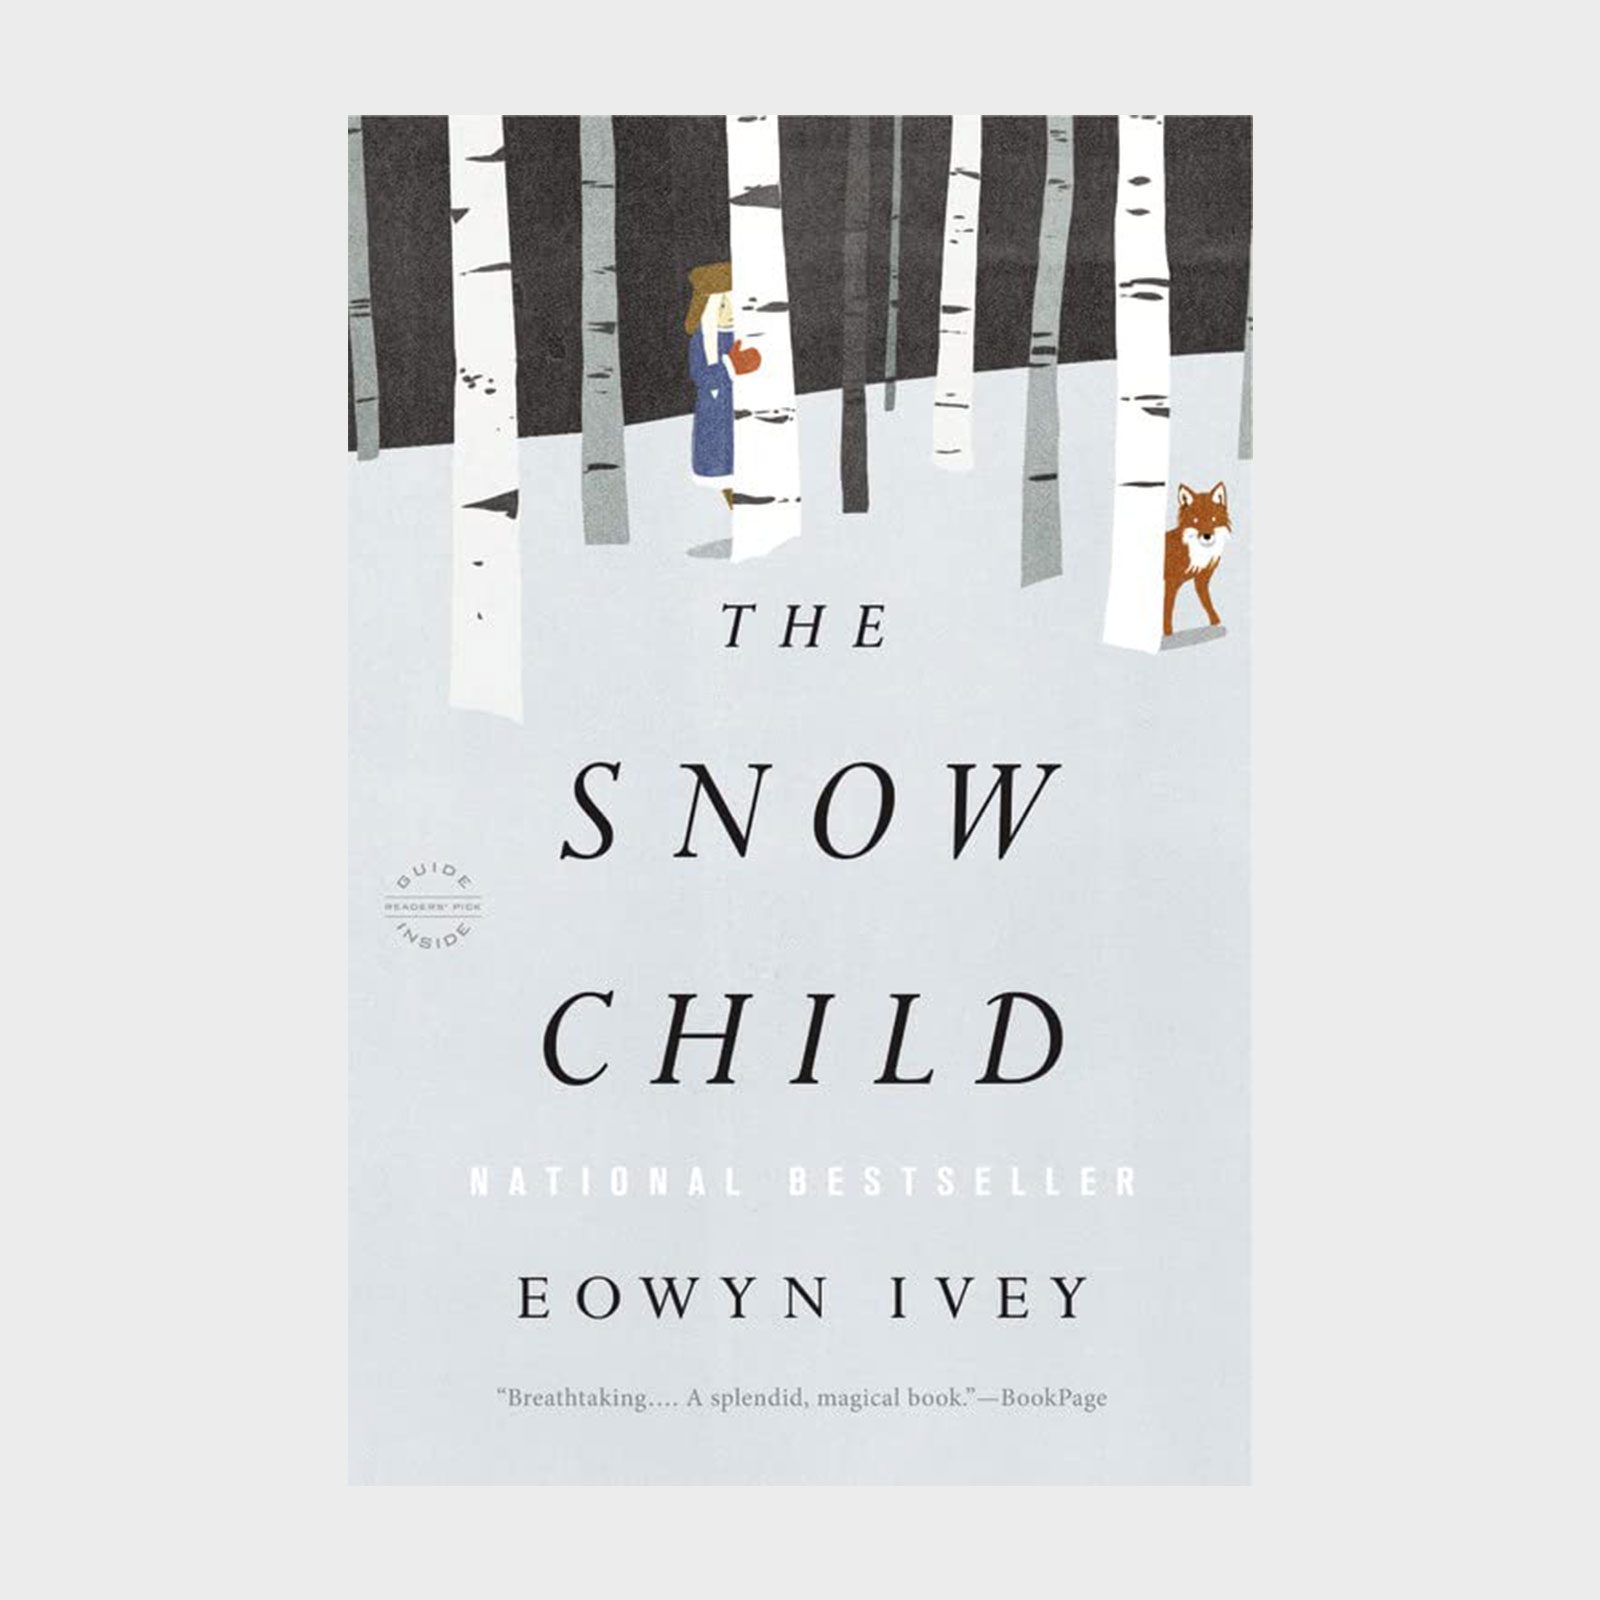 <p>Set in Alaska in the 1920s, <a href="https://www.amazon.com/Snow-Child-Novel-Eowyn-Ivey/dp/0316175668" rel="noopener noreferrer"><em>The Snow Child</em></a> spins the story of a childless couple whose lives are changed by the appearance of a mysterious little girl who calls herself Faina—and who may have been fashioned out of snow. A nod to the Russian fairy tale <em>The Snow Maiden</em>, the story weaves a magical tale of love, loss, grief and repair, and it's guaranteed to <a href="https://www.rd.com/list/books-that-will-make-you-cry/" rel="noopener noreferrer">tug at your heartstrings</a>. The author's debut novel, the book was published in 2012 and short-listed for the Pulitzer Prize for Fiction that same year.</p> <p class="listicle-page__cta-button-shop"><a class="shop-btn" href="https://www.amazon.com/Snow-Child-Novel-Eowyn-Ivey/dp/0316175668">Shop Now</a></p> <p><b>Get <i>Reader's Digest</i>’s </b><a href="https://www.rd.com/newsletter/?int_source=direct&int_medium=rd.com&int_campaign=nlrda_20221001_topperformingcontentnlsignup&int_placement=incontent"><b>Read Up newsletter</b></a><b> for more books, humor, cleaning, travel, tech and fun facts all week long.</b></p> <p><strong>Sources:</strong></p> <ul> <li><a href="https://www.nybooks.com/articles/2023/05/25/the-inventor-of-magical-realism-mr-president-asturias/" rel="noopener noreferrer"><em>The New York Review</em></a>: "The Inventor of Magical Realism"</li> <li><a href="https://www.vanityfair.com/culture/2015/12/gabriel-garcia-marquez-one-hundred-years-of-solitude-history" rel="noopener noreferrer"><em>Vanity Fair</em></a>: "The Secret History of <em>One Hundred Years of Solitude</em>"</li> <li><a href="https://www.theguardian.com/books/2021/apr/03/salman-rushdie-on-midnights-children-at-40-india-is-no-longer-the-country-of-this-novel" rel="noopener noreferrer"><em>The Guardian</em></a>: "Salman Rushdie on Midnight's Children at 40: 'India is no longer the country of this novel'"</li> <li><a href="https://www.newyorker.com/culture/the-new-yorker-interview/the-underground-worlds-of-haruki-murakami" rel="noopener noreferrer"><em>The New Yorker</em></a>: "The Underground Worlds of Haruki Murakami"</li> <li><a href="https://www.neh.gov/humanities/2011/januaryfebruary/conversation/the-real-mo-yan" rel="noopener noreferrer">The National Endowment for the Humanities</a>: "The Real Mo Yan"</li> </ul>